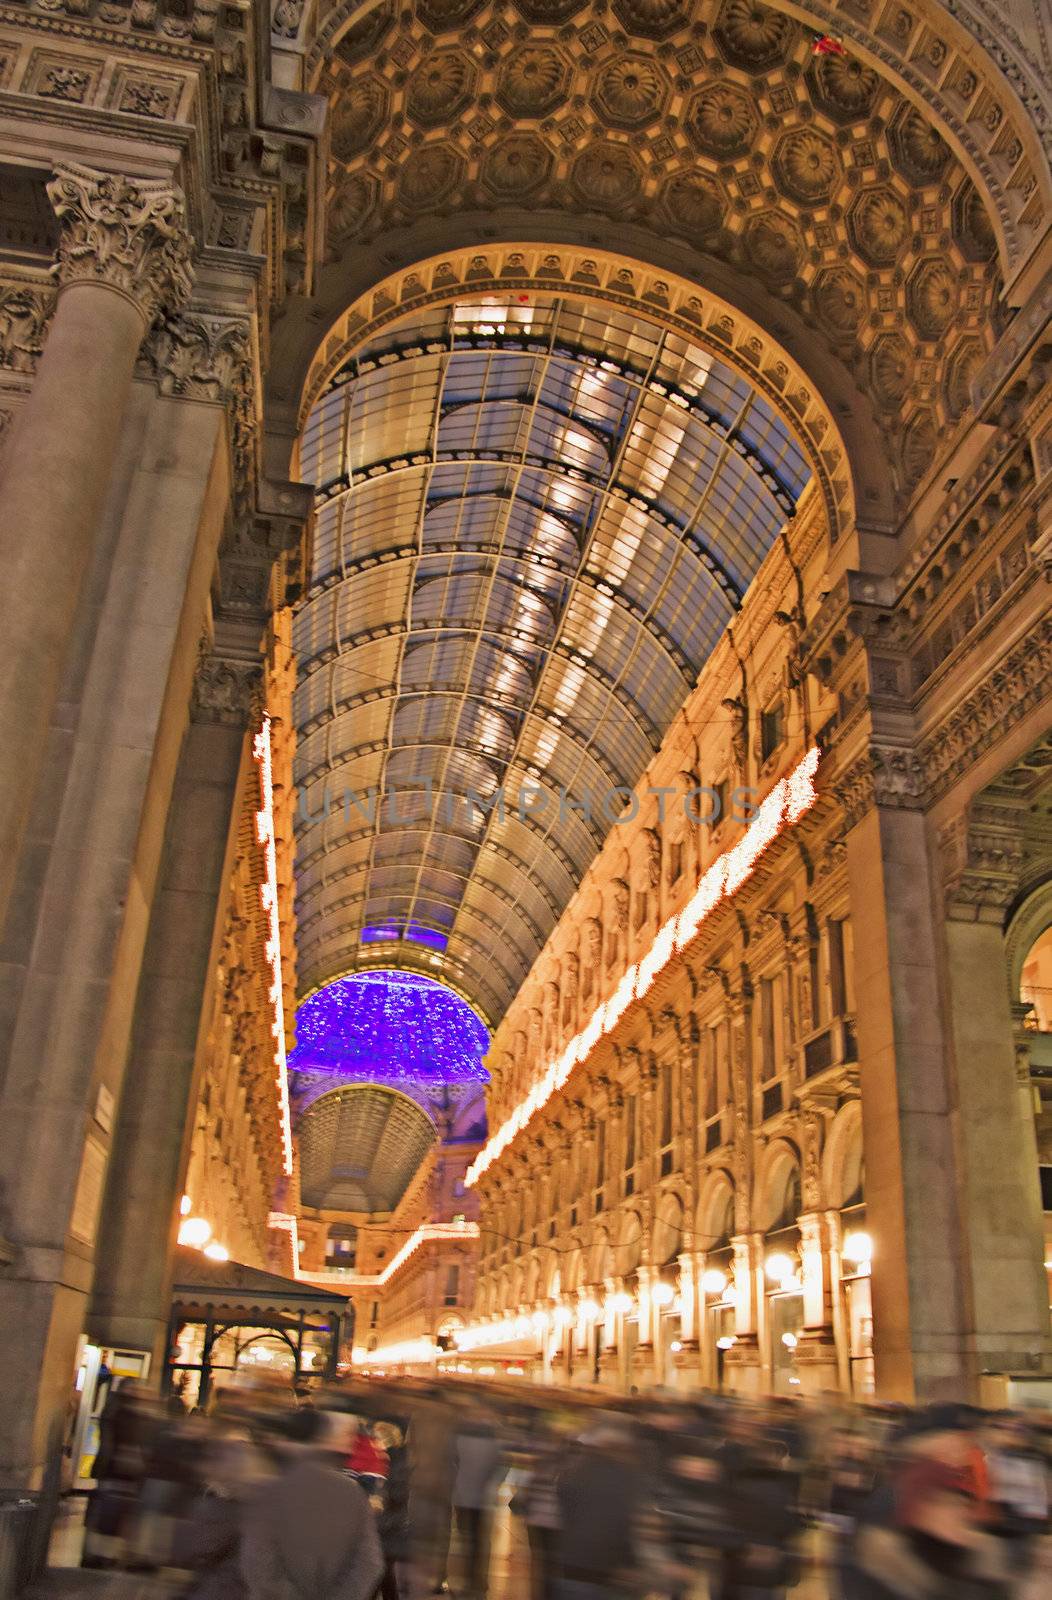 View of the "Galleria Vittorio Emanuele", characteristic gallery in piazza Duomo at Milano, Italy, with pedestrians voluntarily blurred away